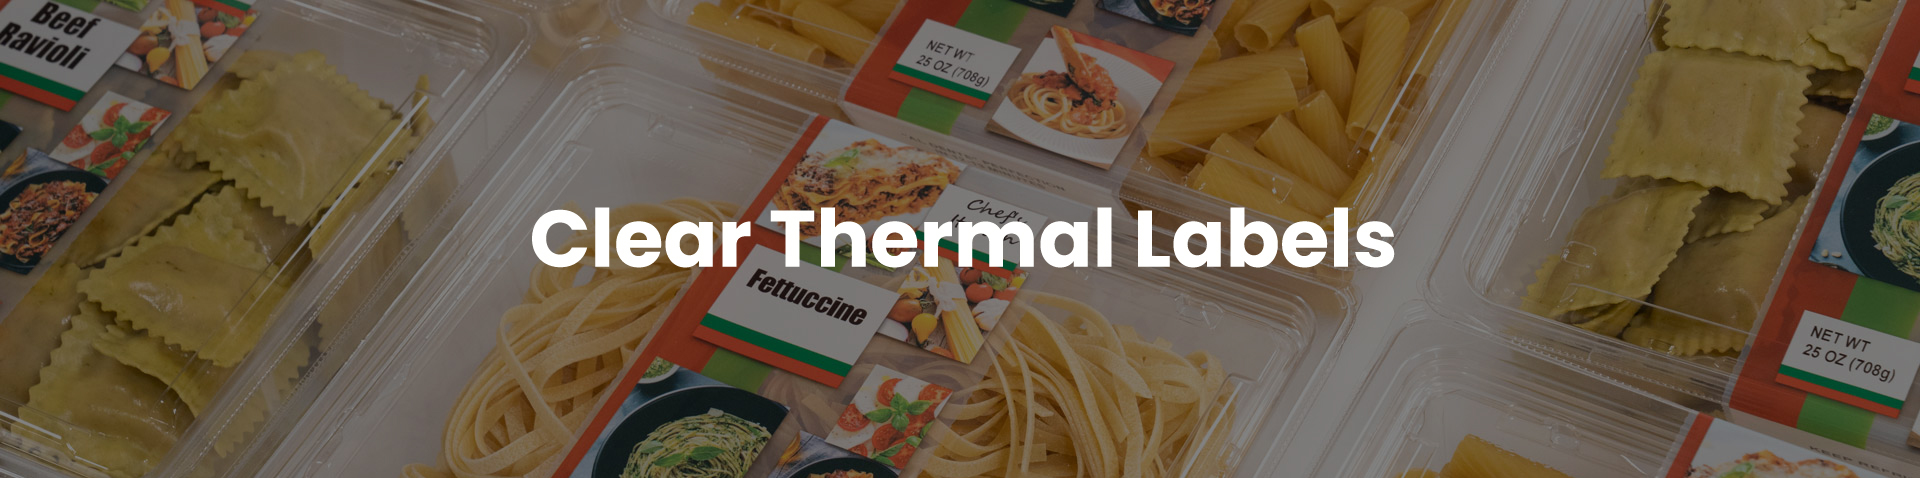 Clear Thermal Labels